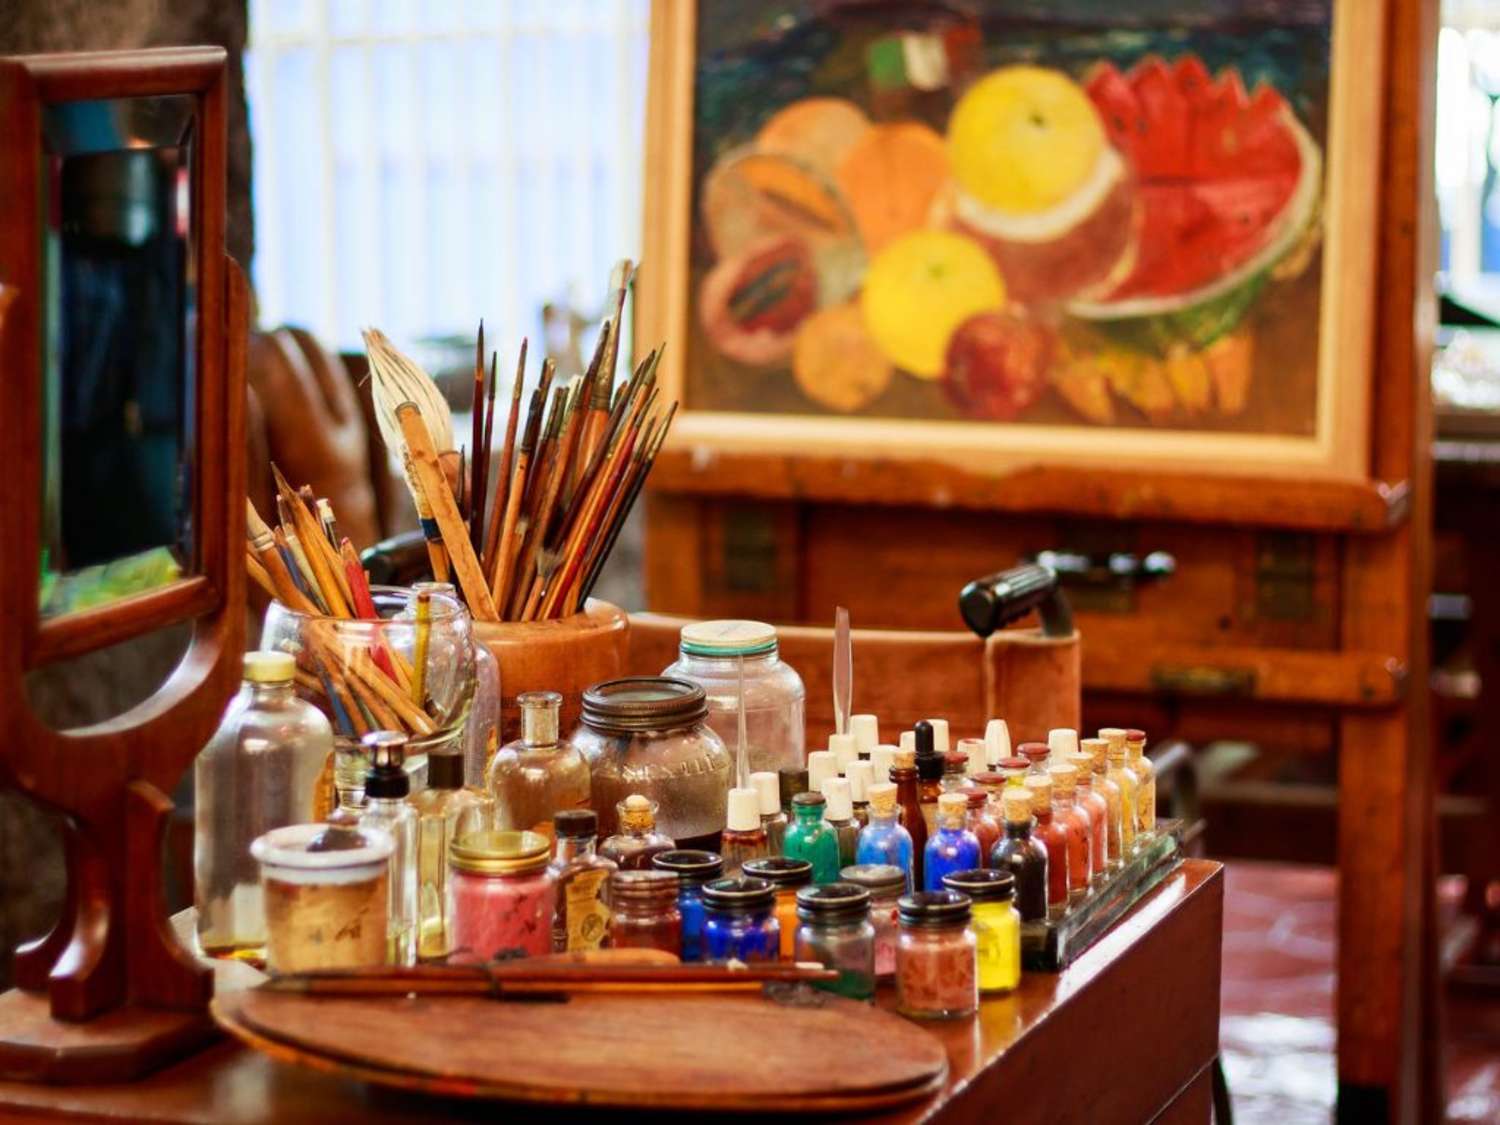 a picture of Kahlo's studio equipment